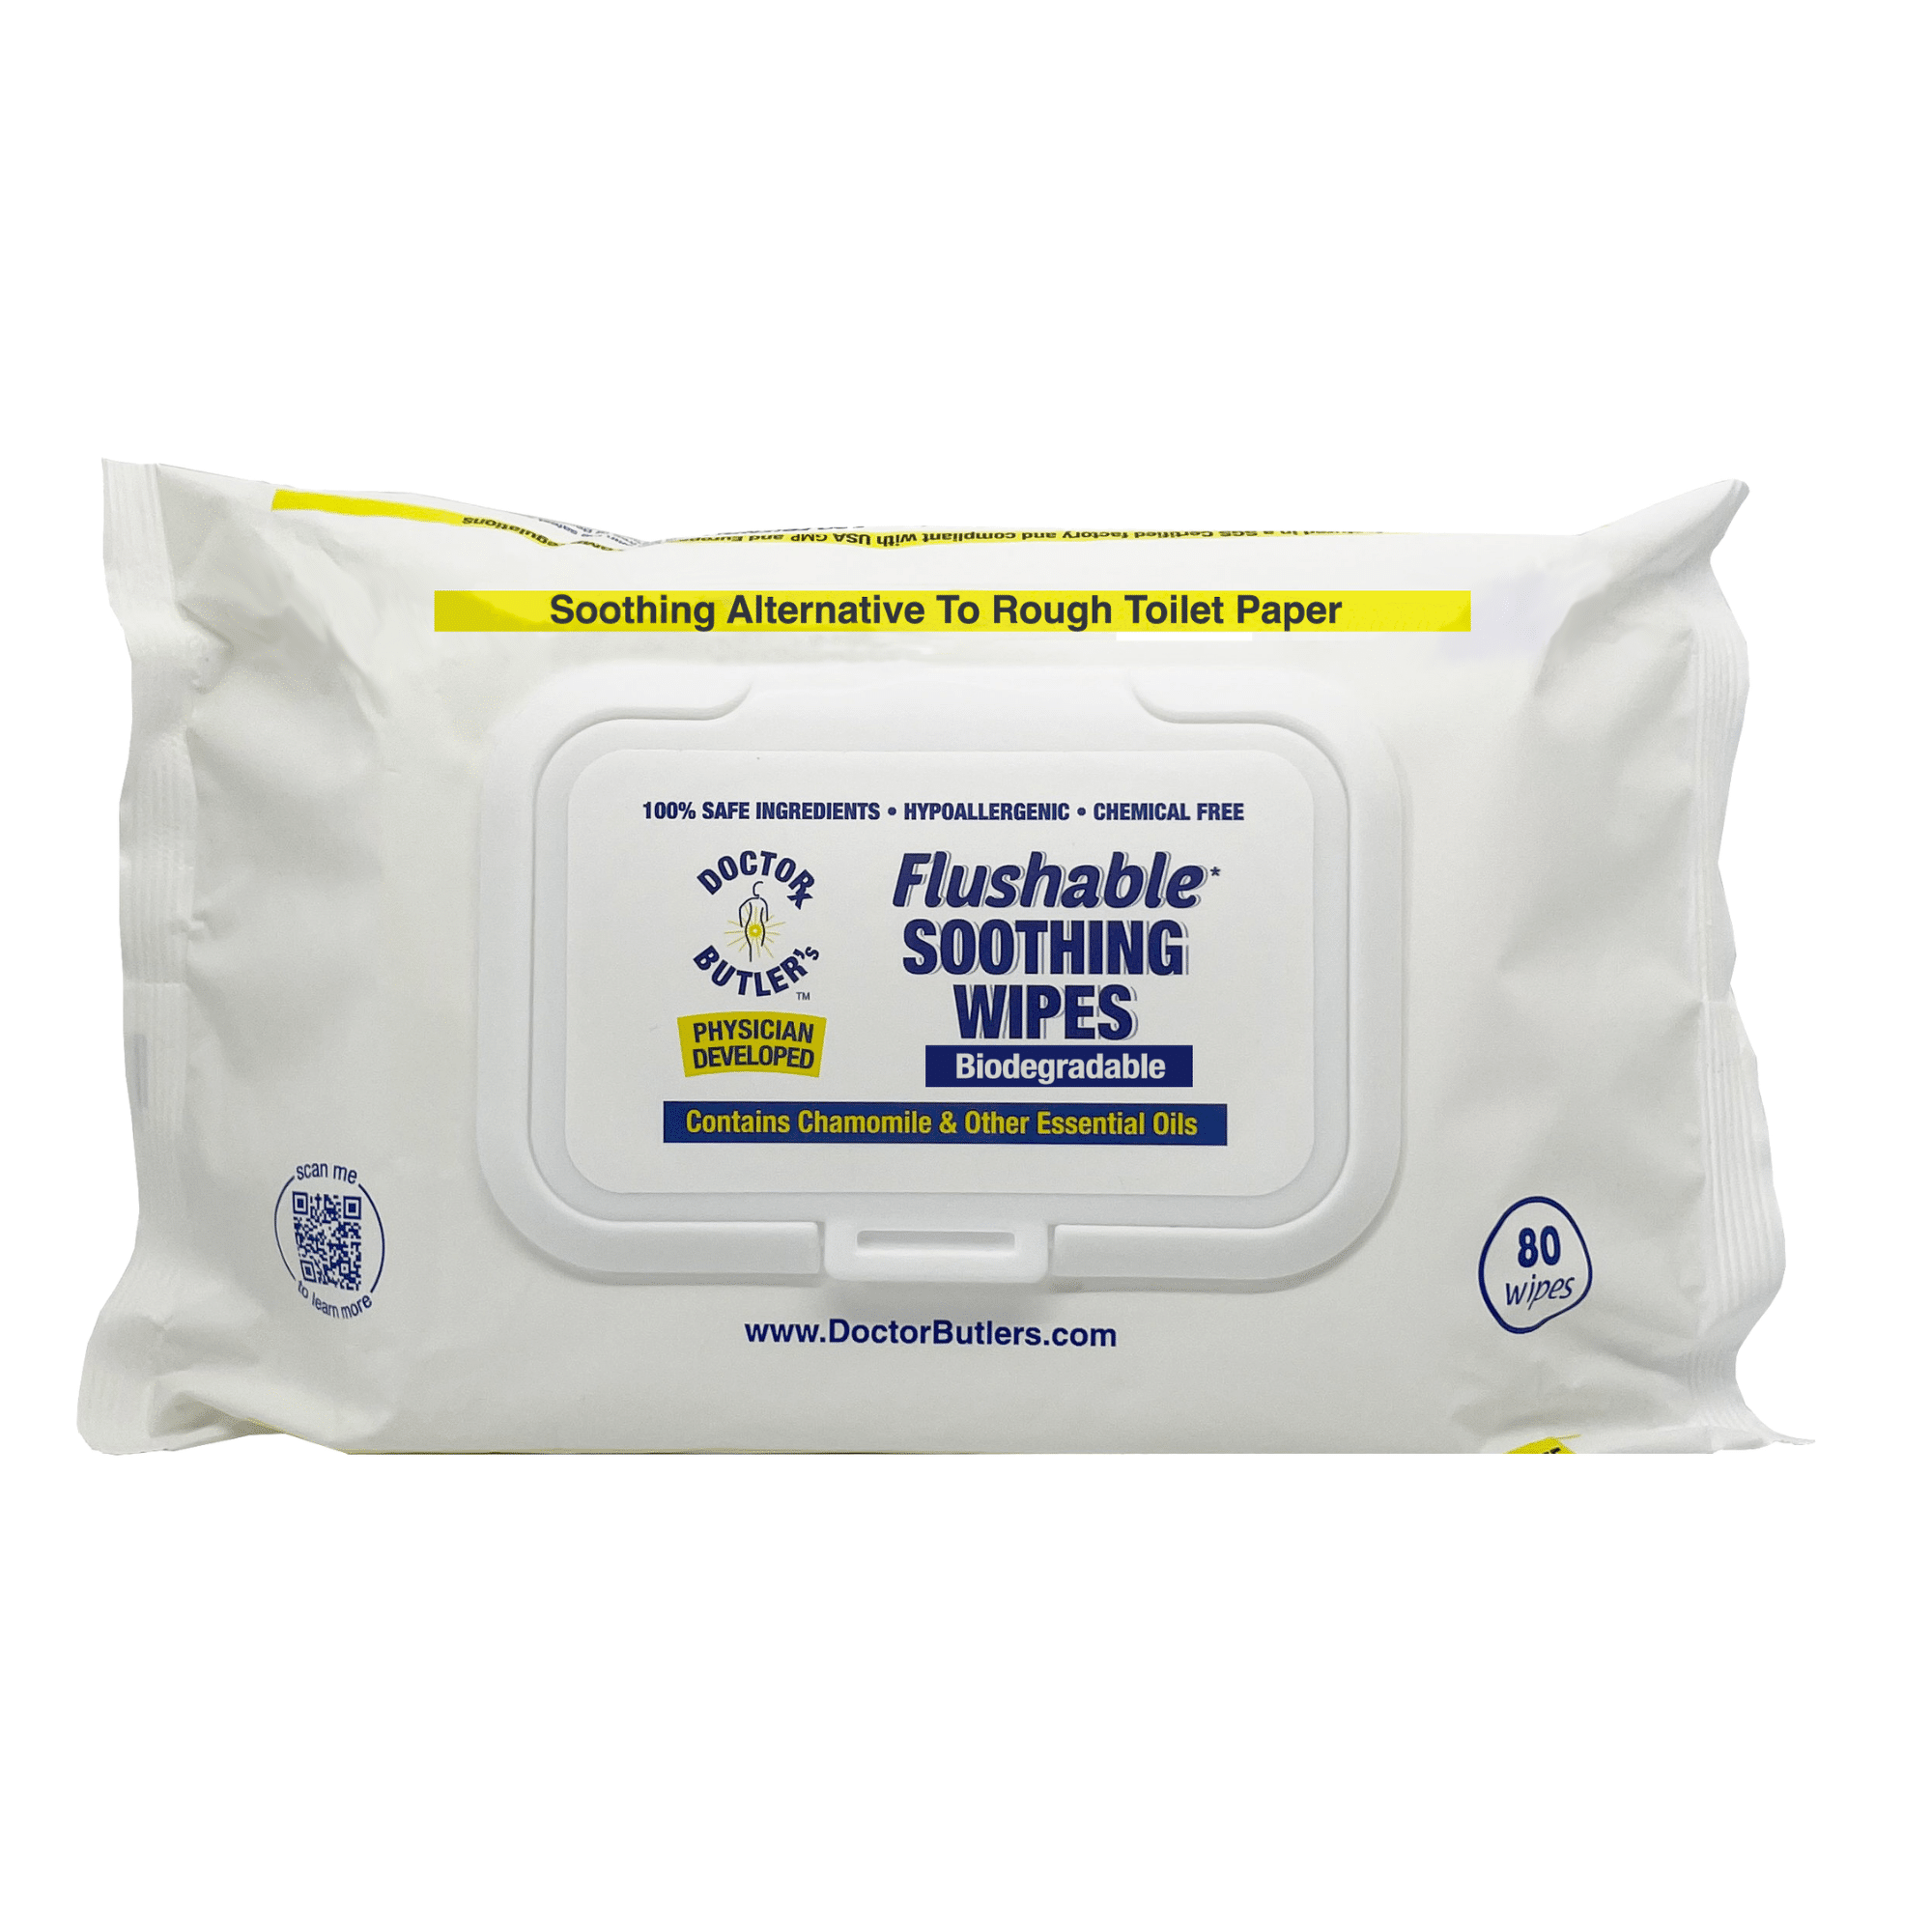 Doctor Butler's Soothing Flushable Wipes